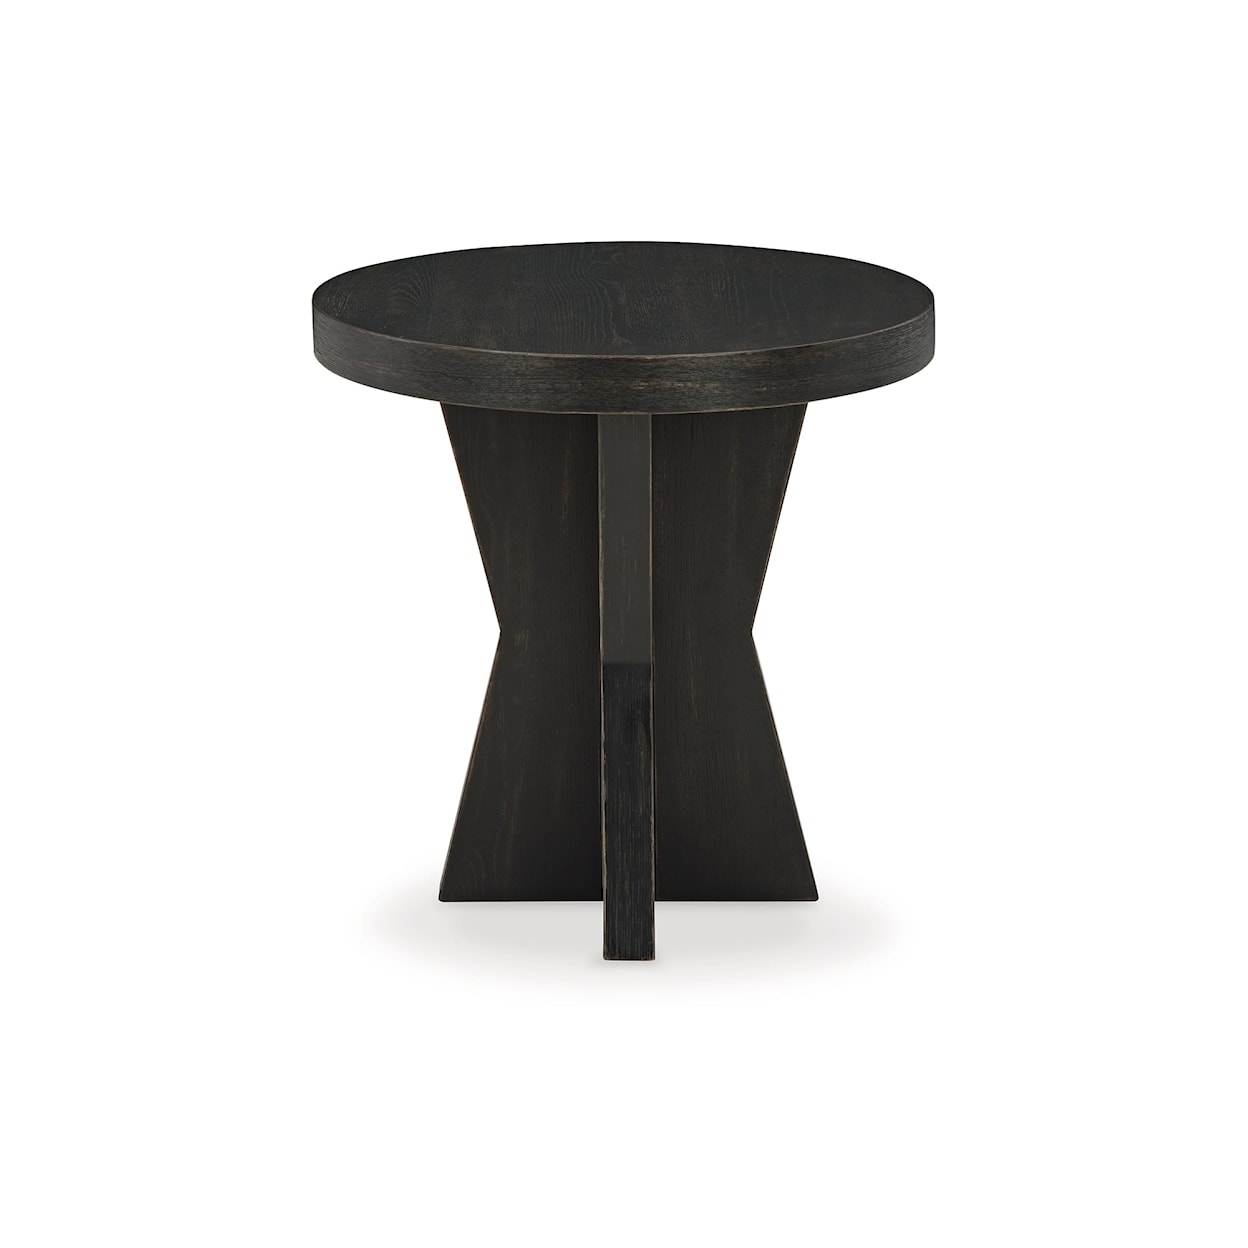 Signature Design by Ashley Galliden Round End Table